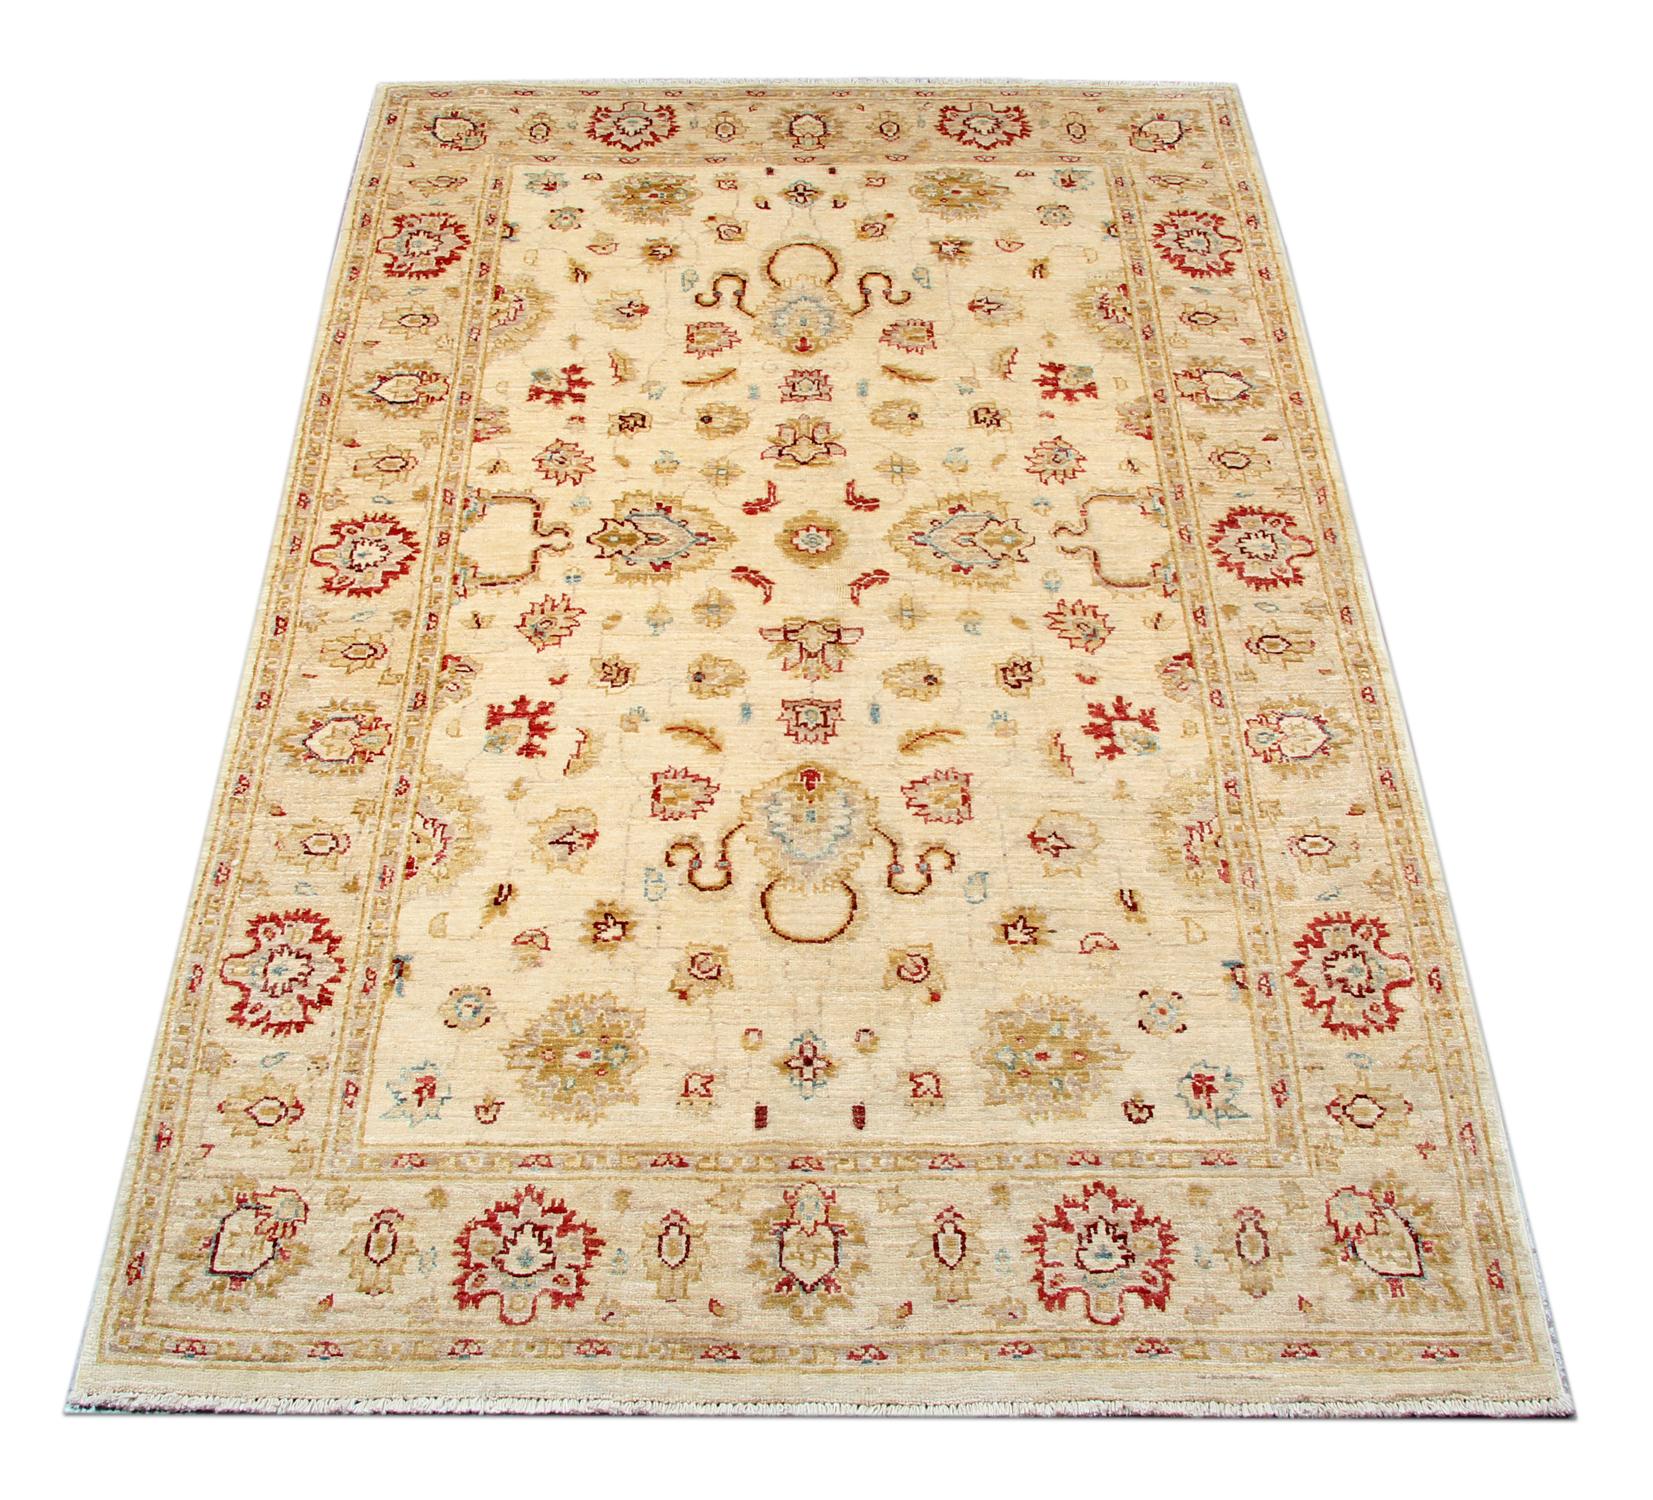 This rug is a Ziegler Sultanabad rug was constructed on our looms by our master weavers in Afghanistan. Featuring a cream and beige floral design woven on an ivory background and a bold red border. handmade with all-natural veg dyes all hand-spun